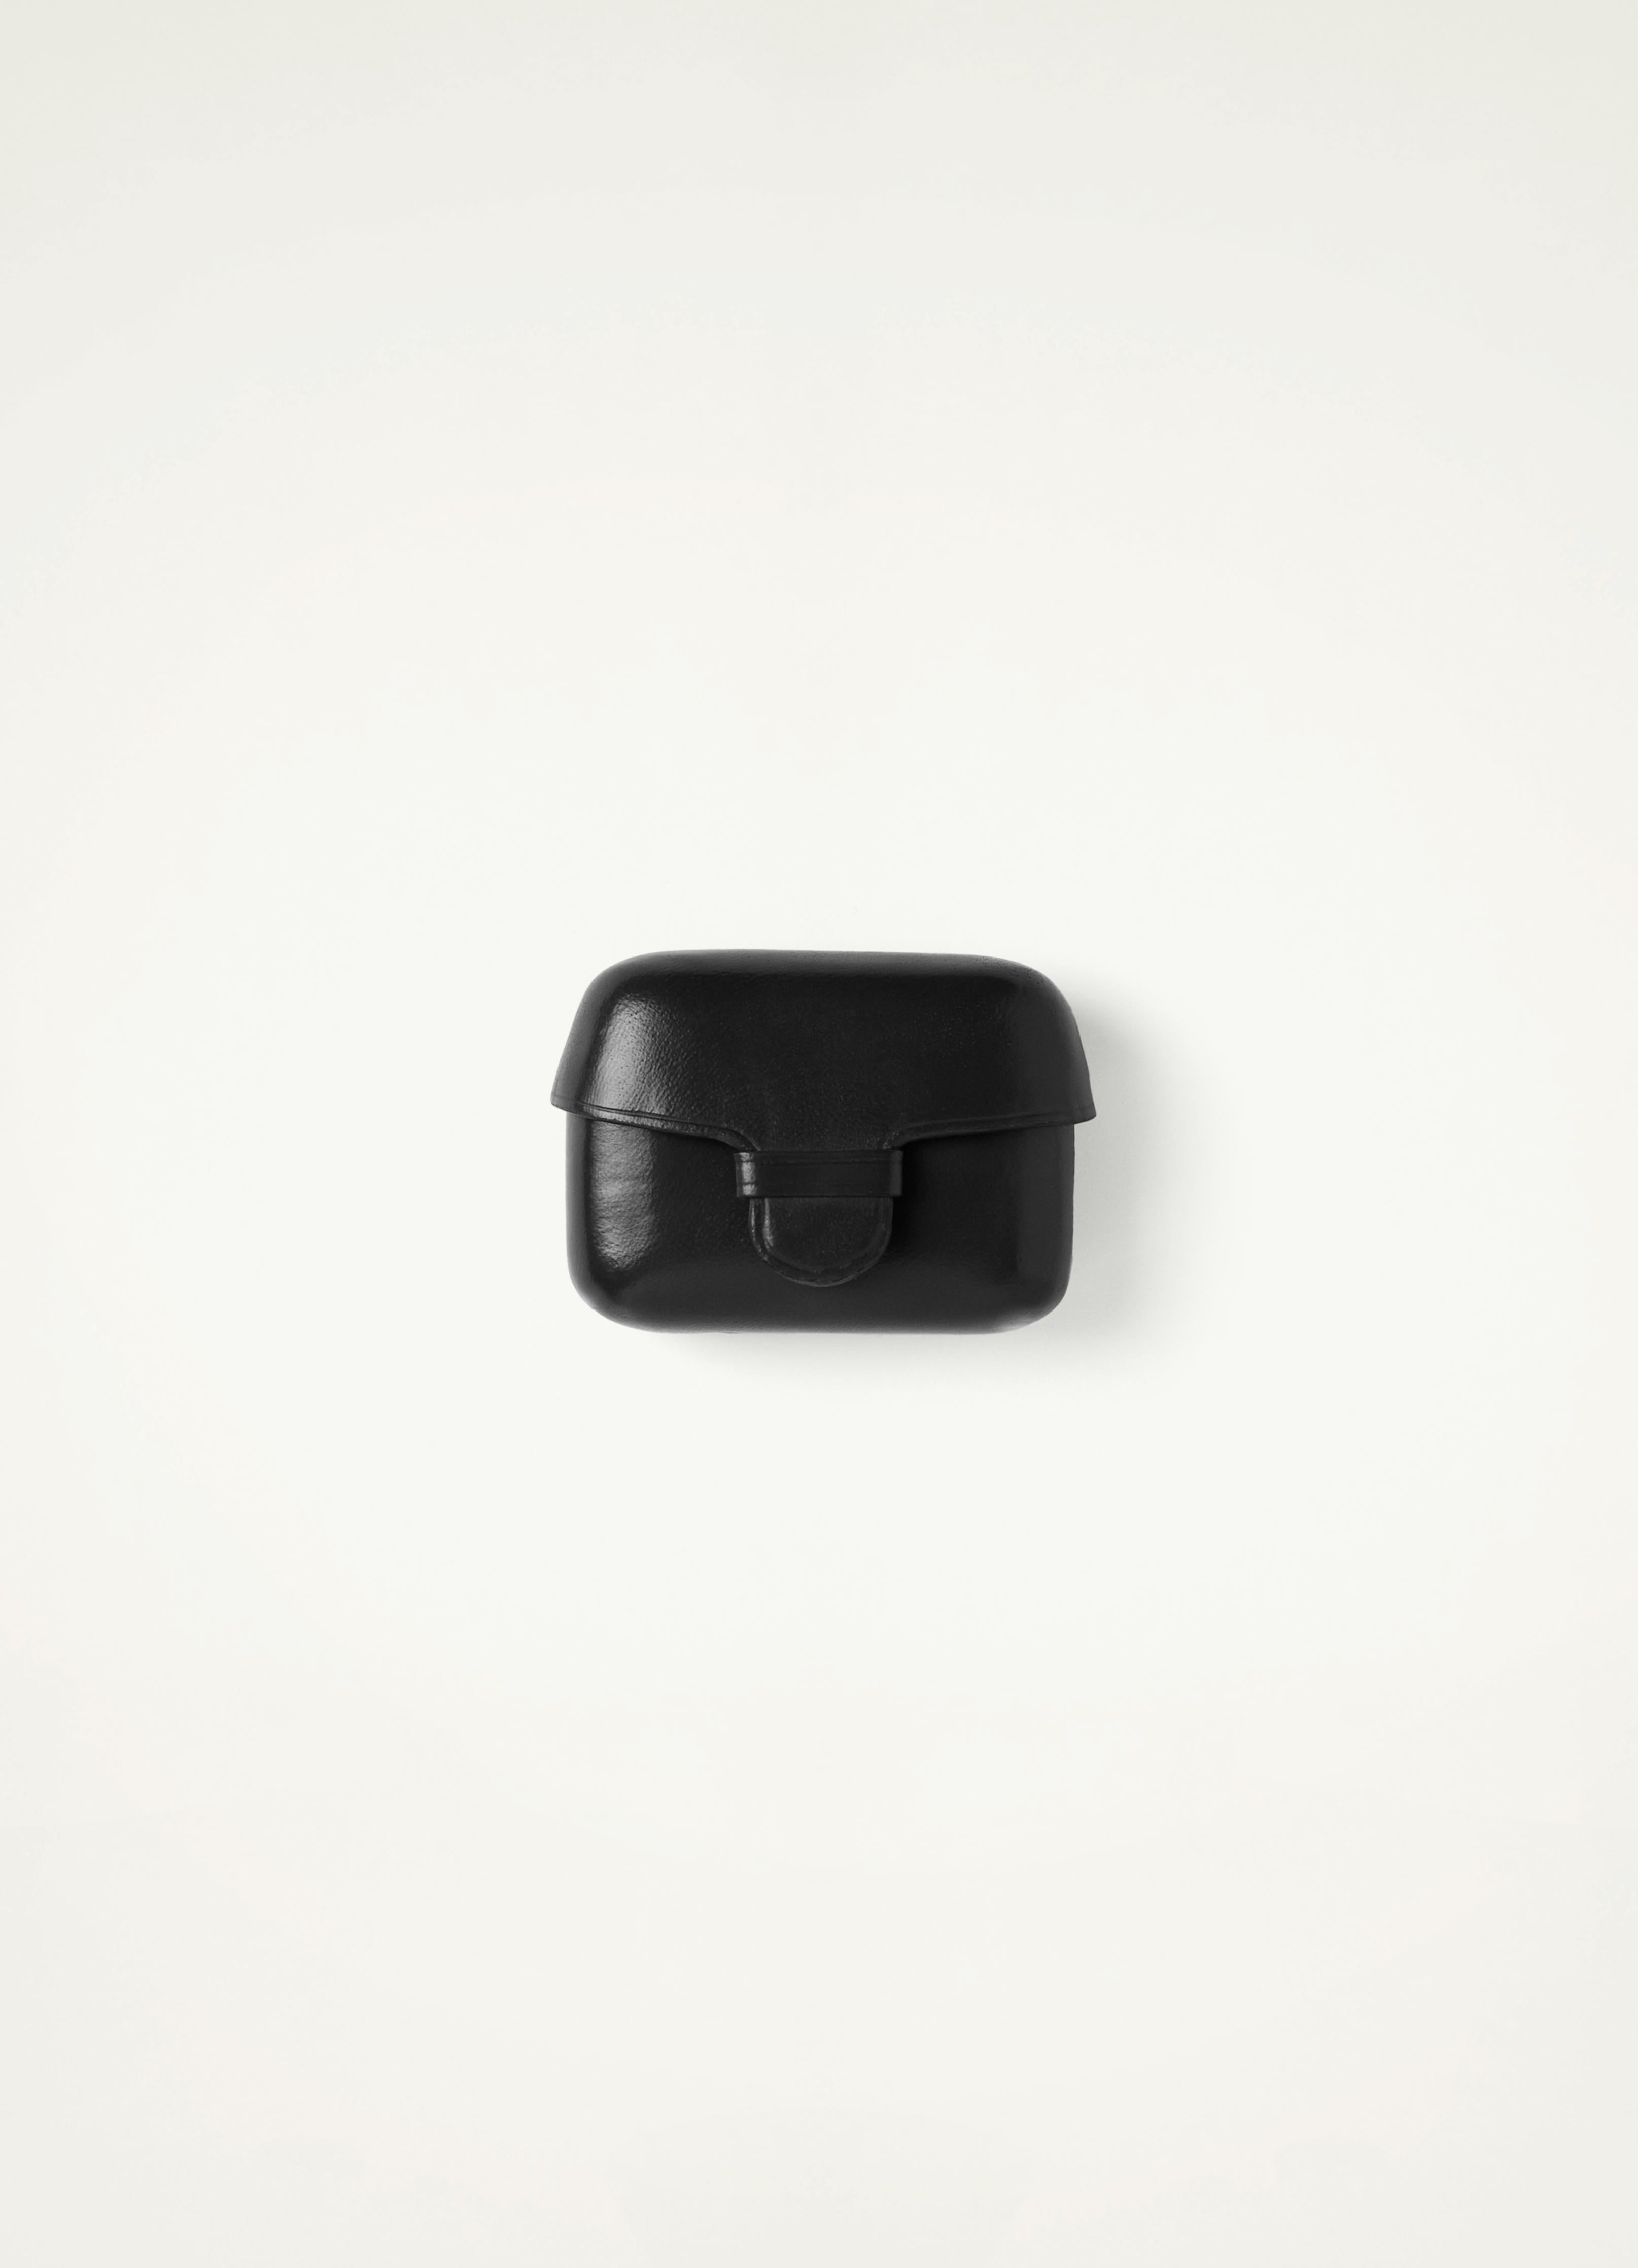 IL BUSSETTO FOR LEMAIRE AIRPODS PRO 2 CASE HOLDER - 7